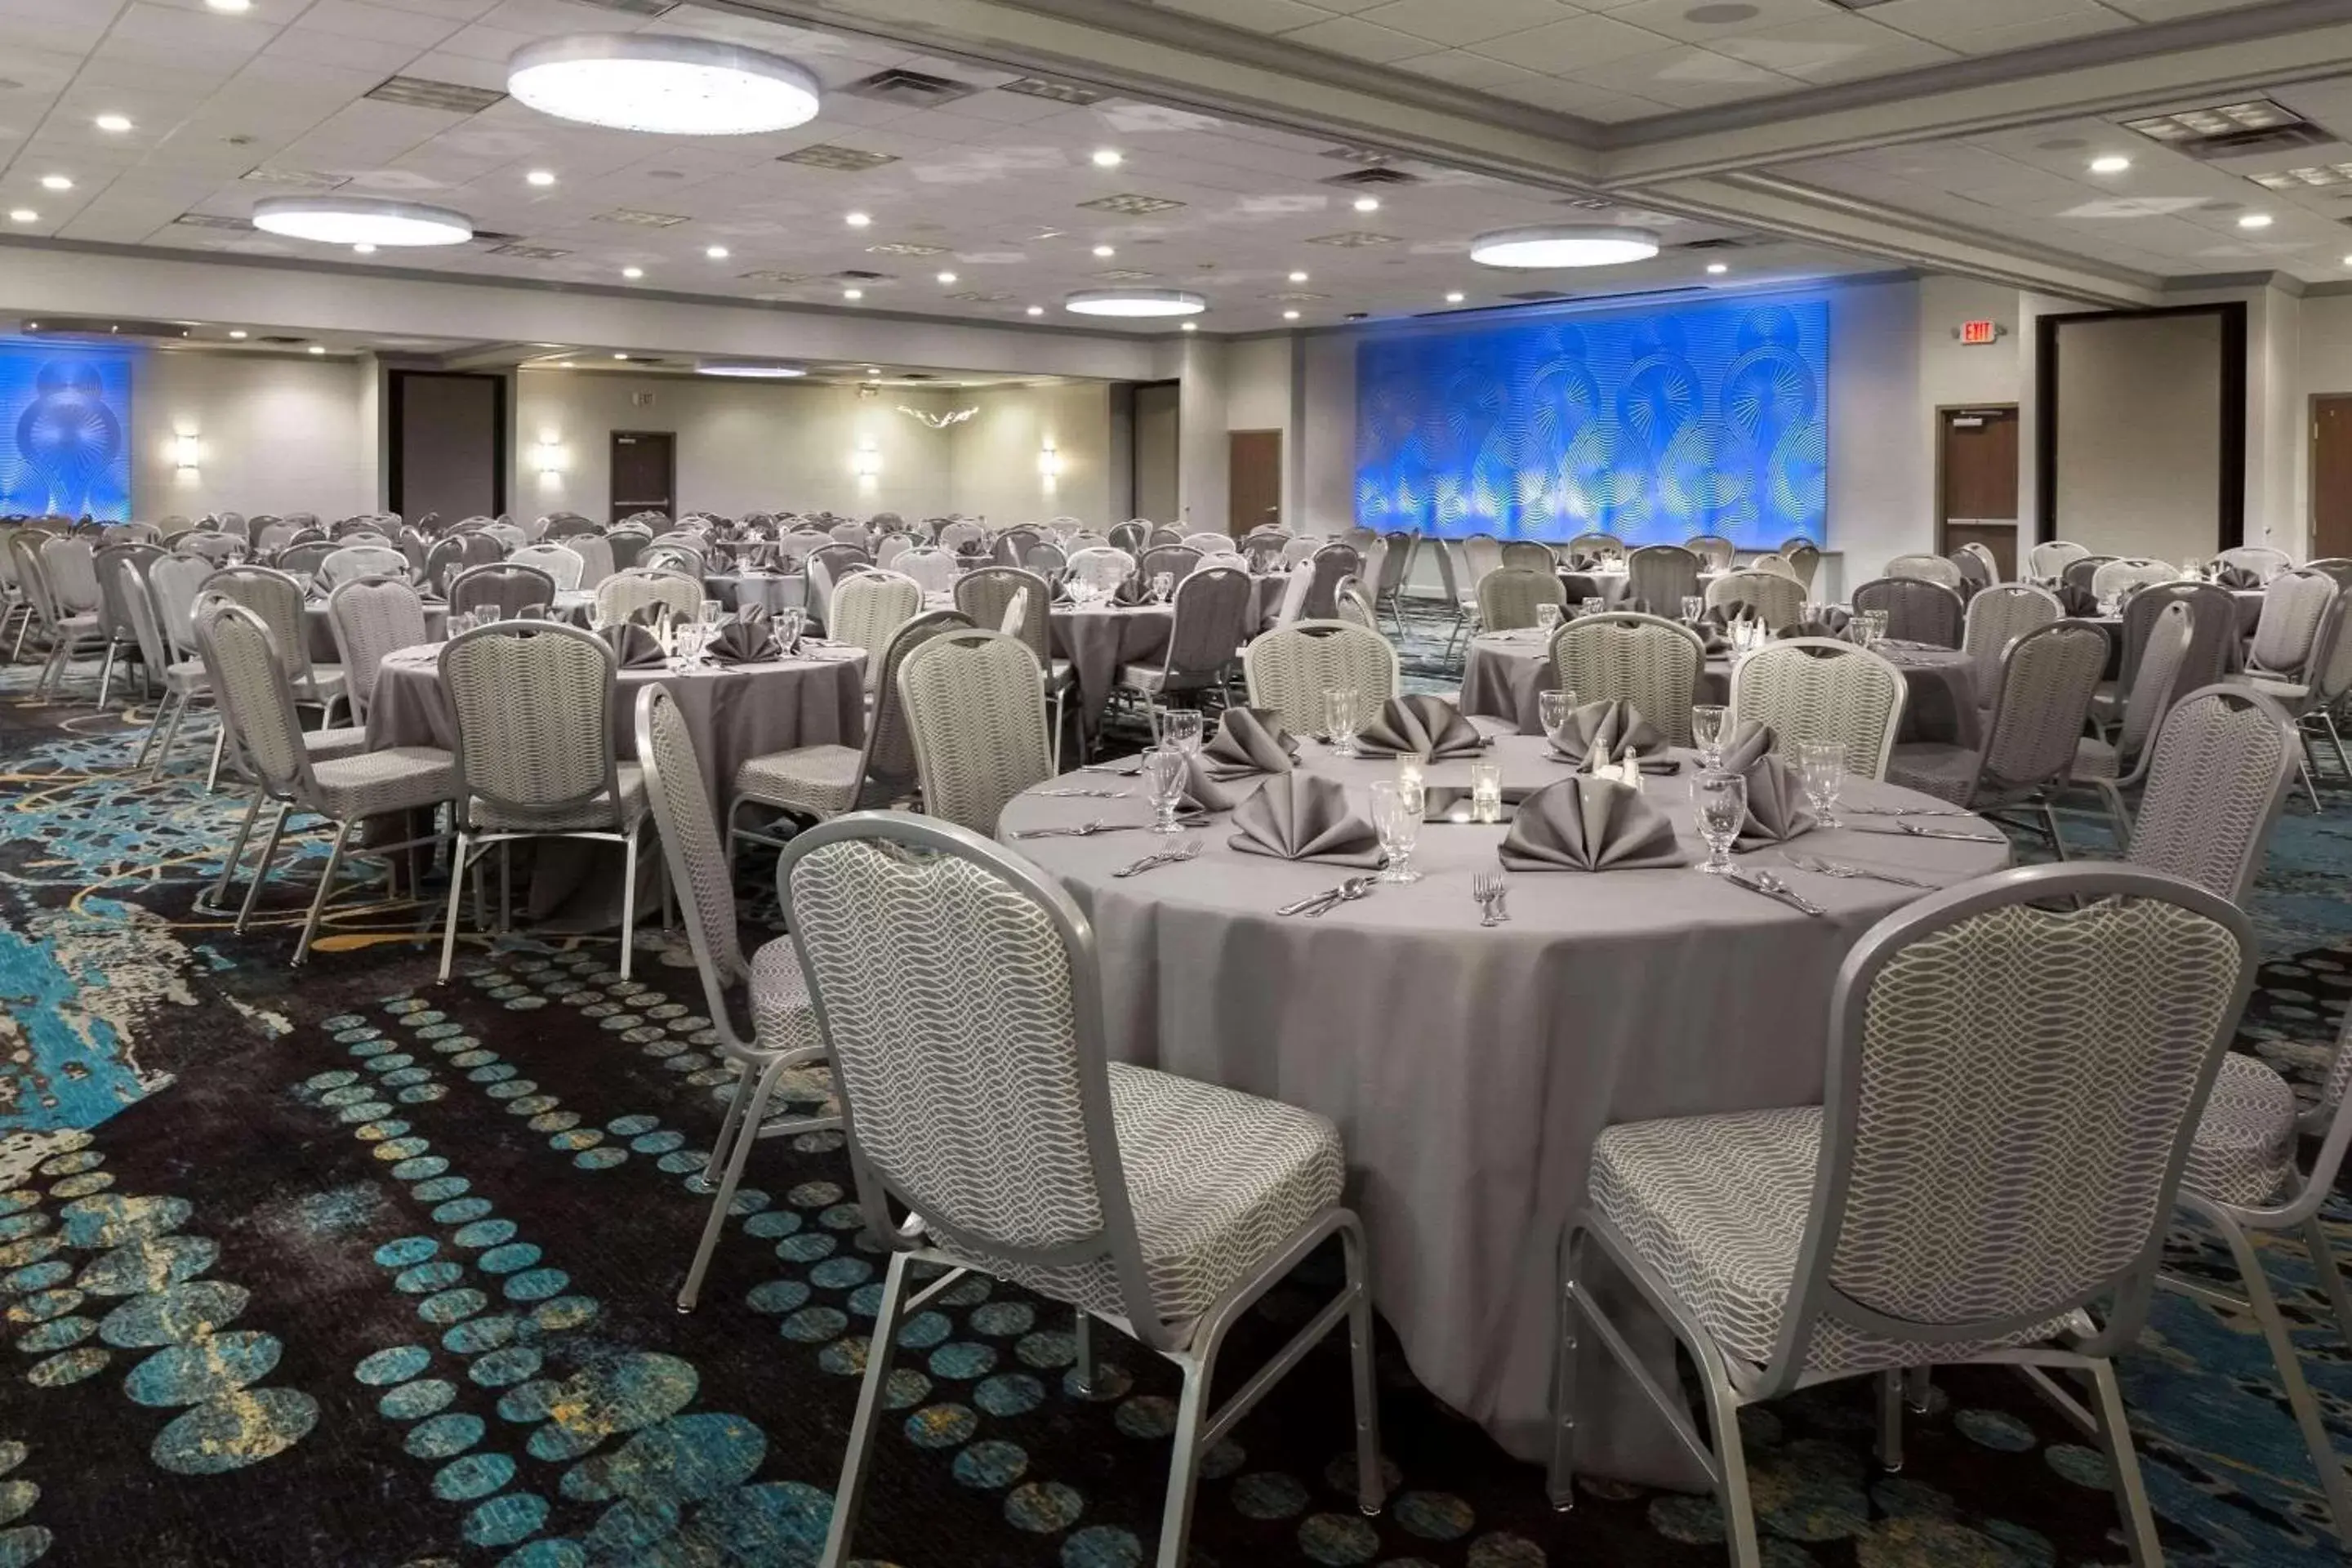 Meeting/conference room, Banquet Facilities in Radisson Hotel & Conference Center Coralville - Iowa City